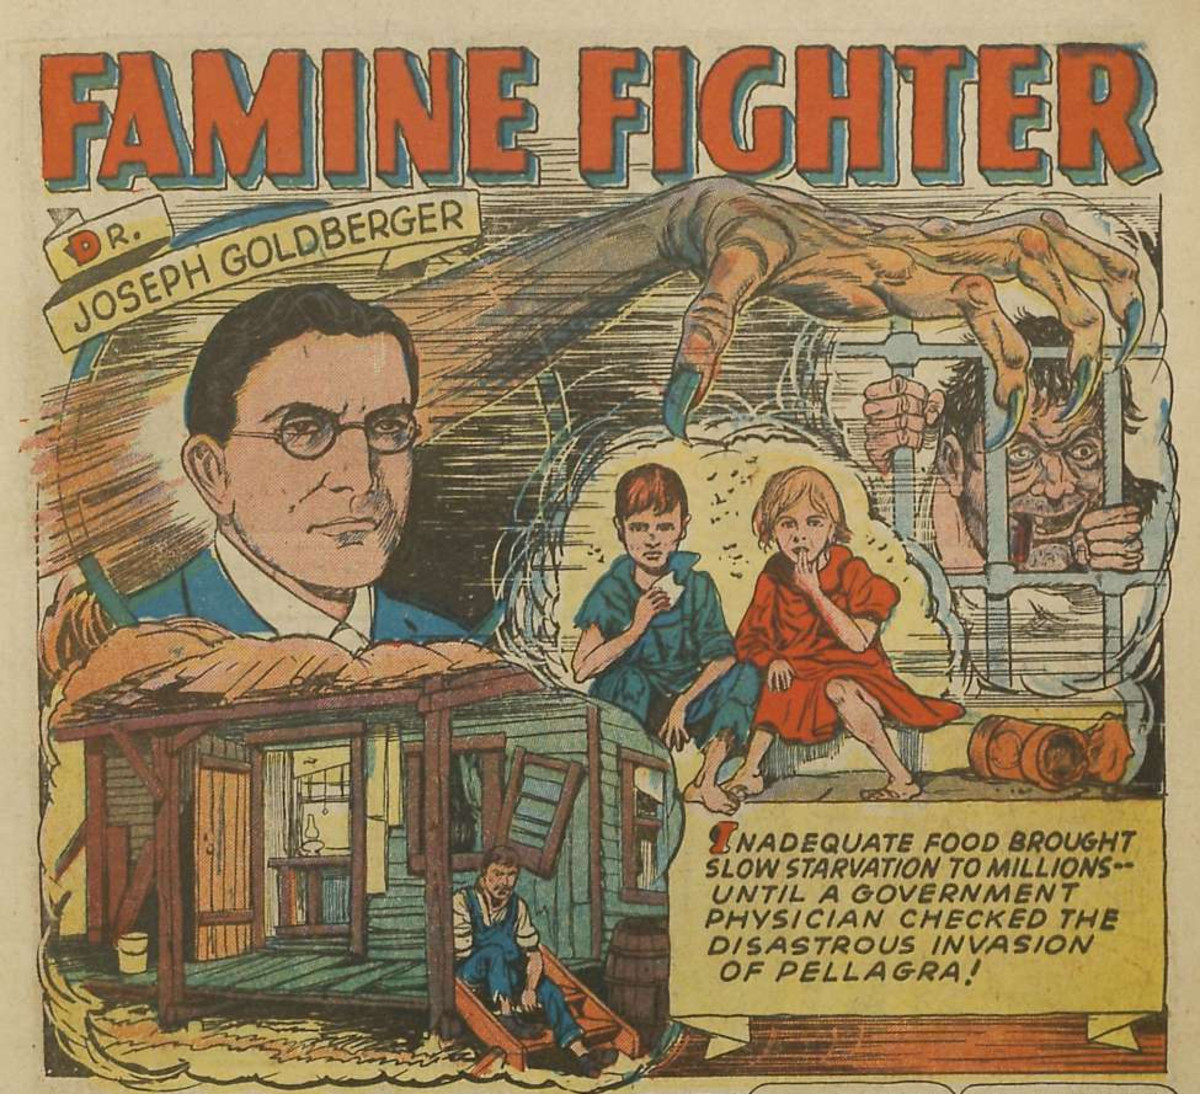 In the pages of Real Life Comics No. 12, Dr. Joseph Goldberger, who discovered the cause of pellagra, gets the hero treatment as “Famine Fighter.”